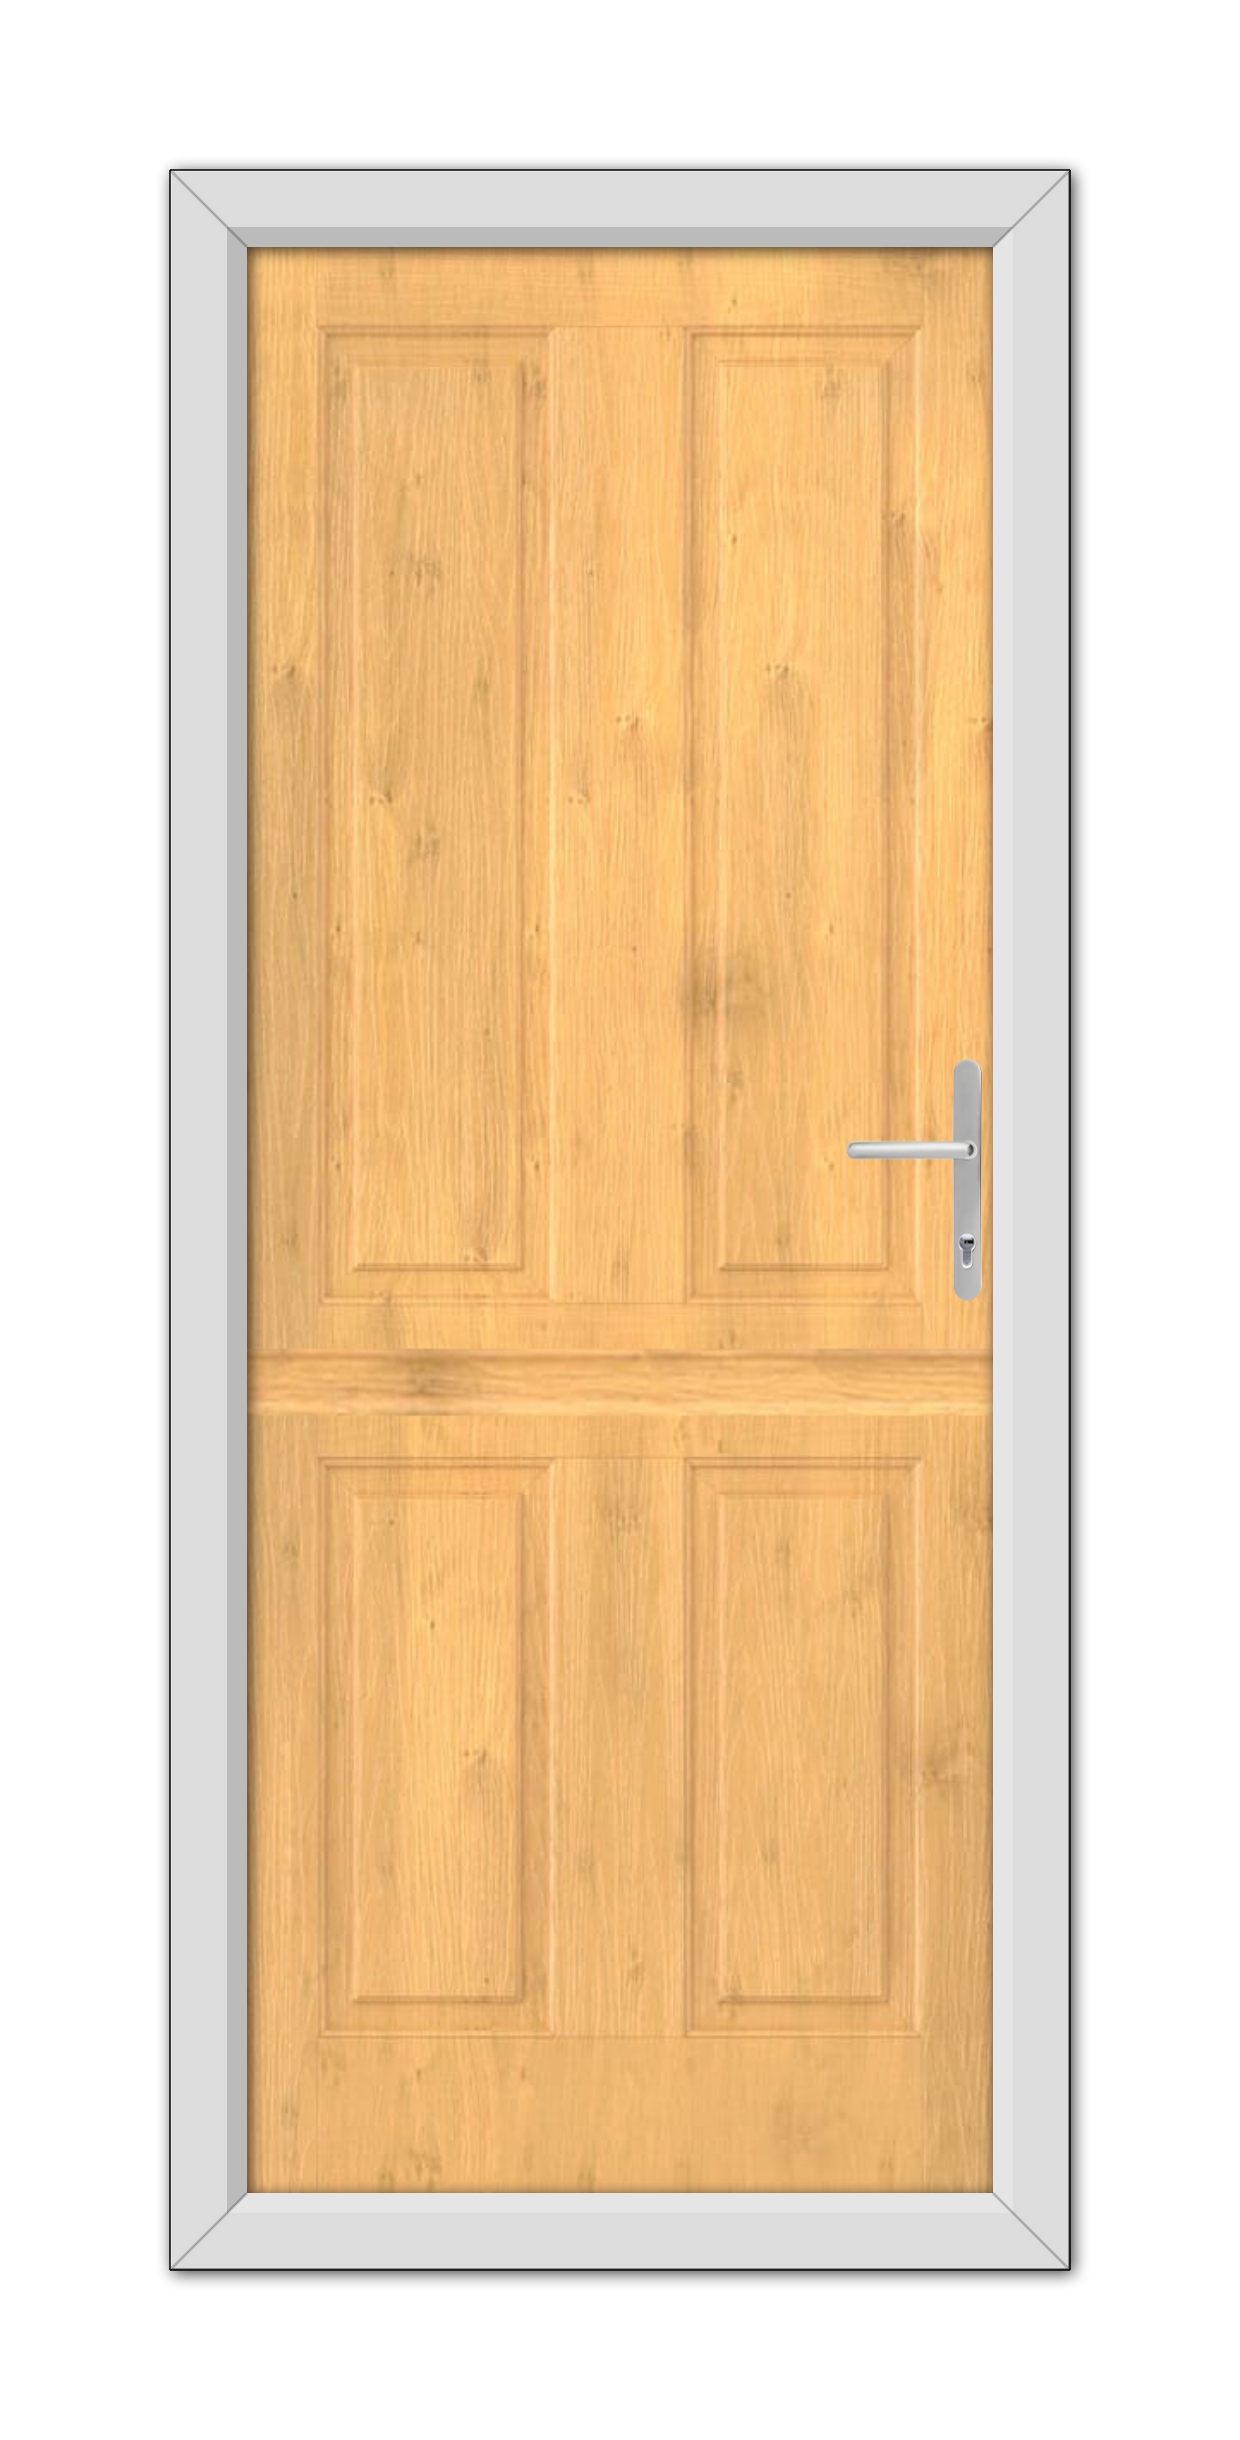 An Irish Oak Whitmore Solid Stable Composite Door 48mm Timber Core with a metal handle, set within a gray frame, viewed frontally.